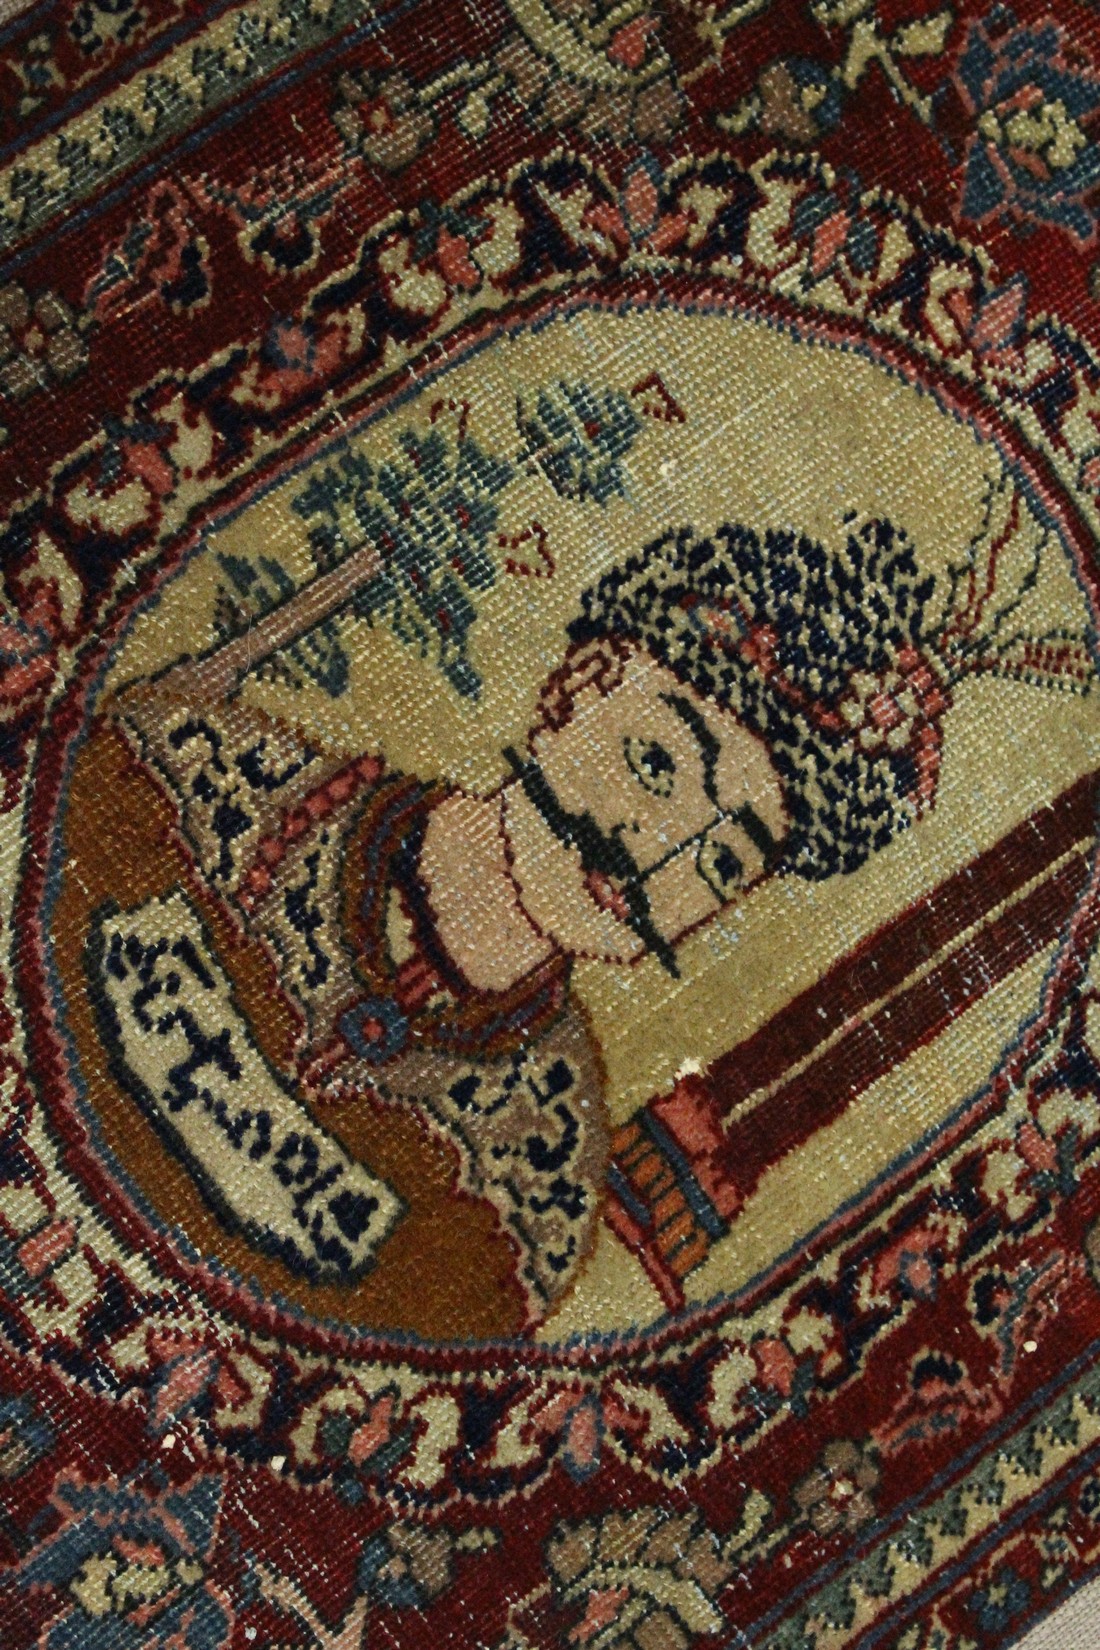 A SMALL PERSIAN MAT / WALL HANGING woven with a portrait of the King of Persia. Overall size 2ft 9. - Image 2 of 3